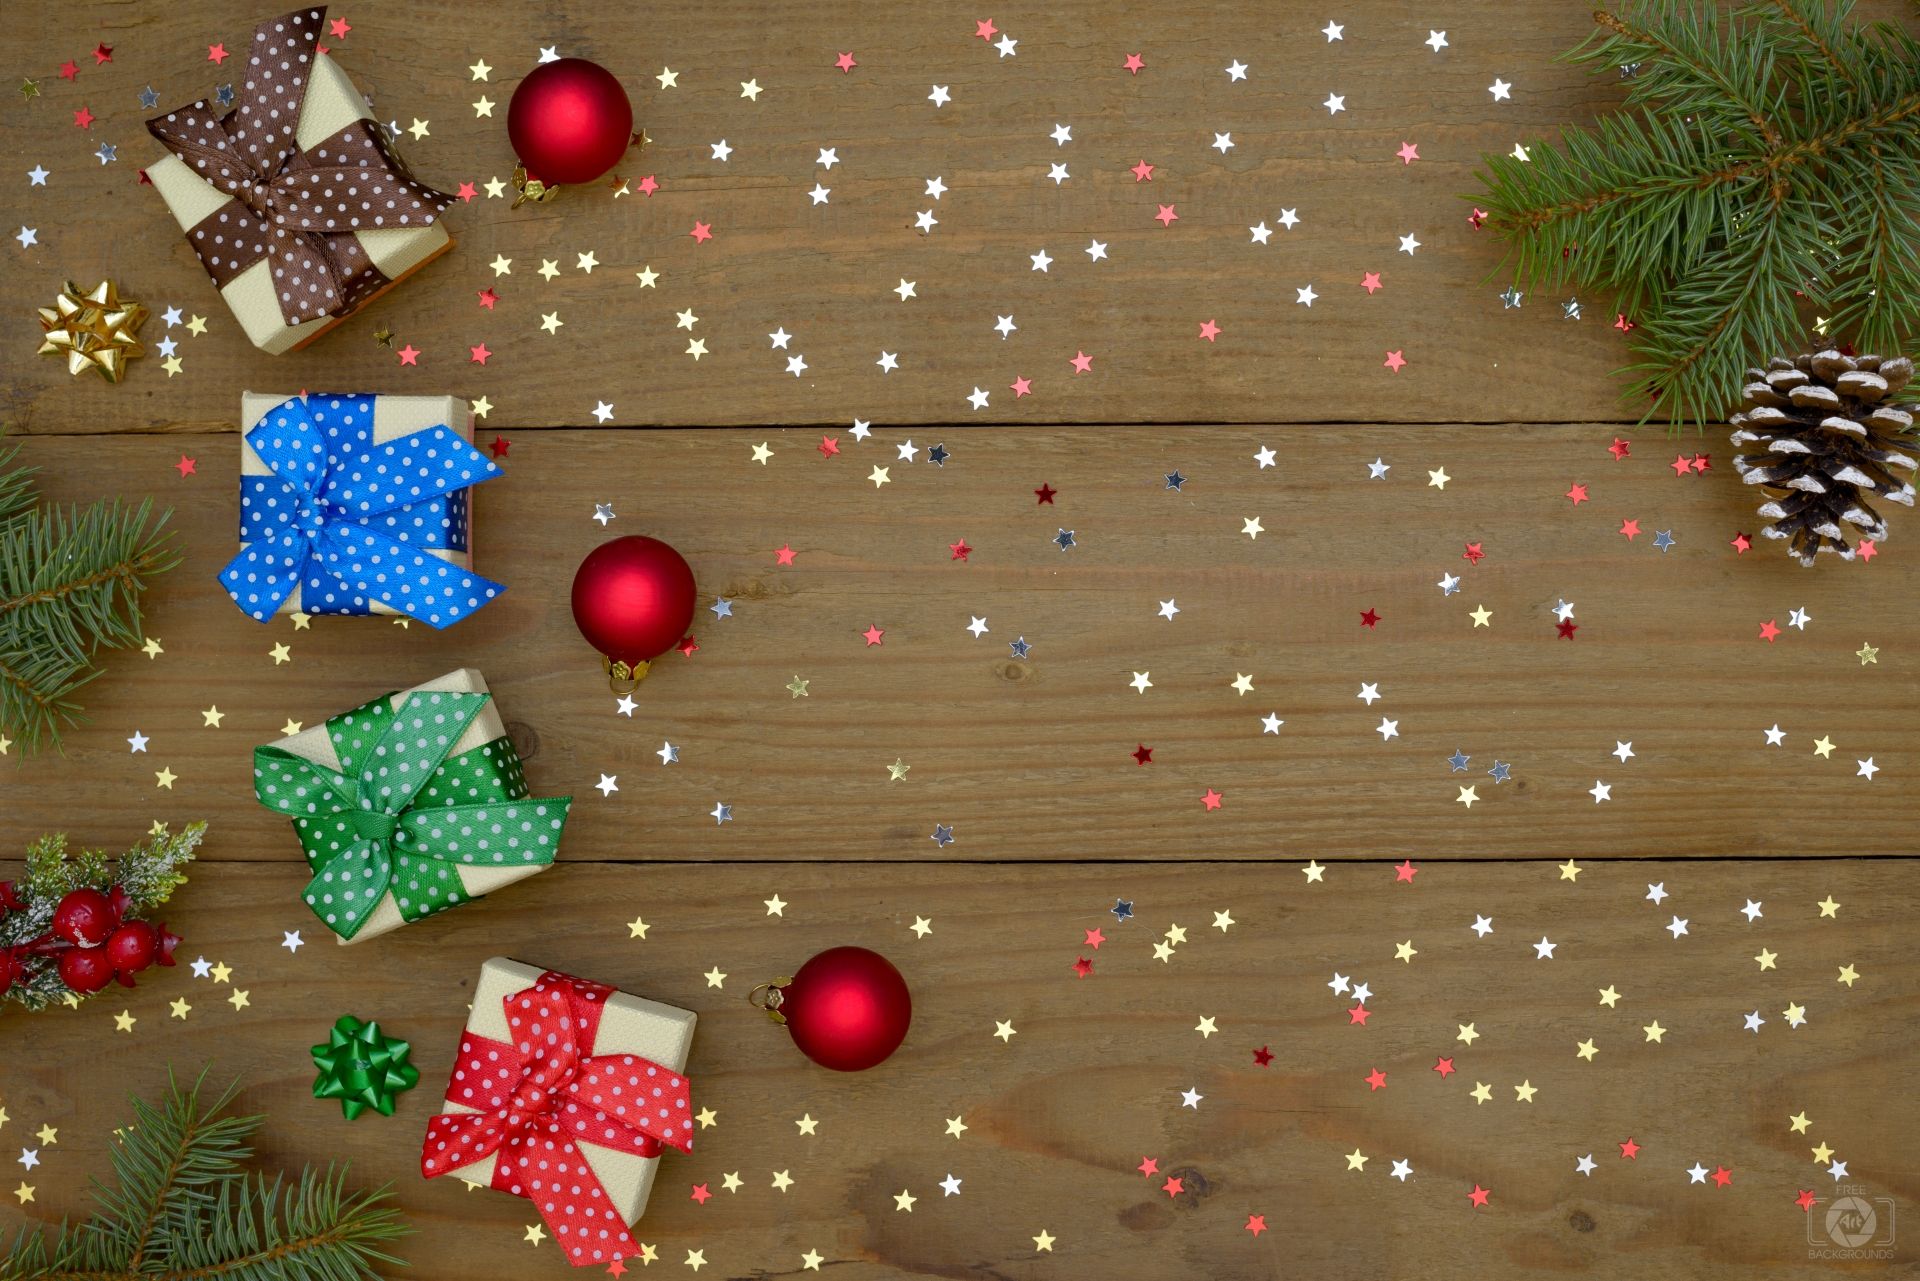 Christmas Backgrounds with Gifts